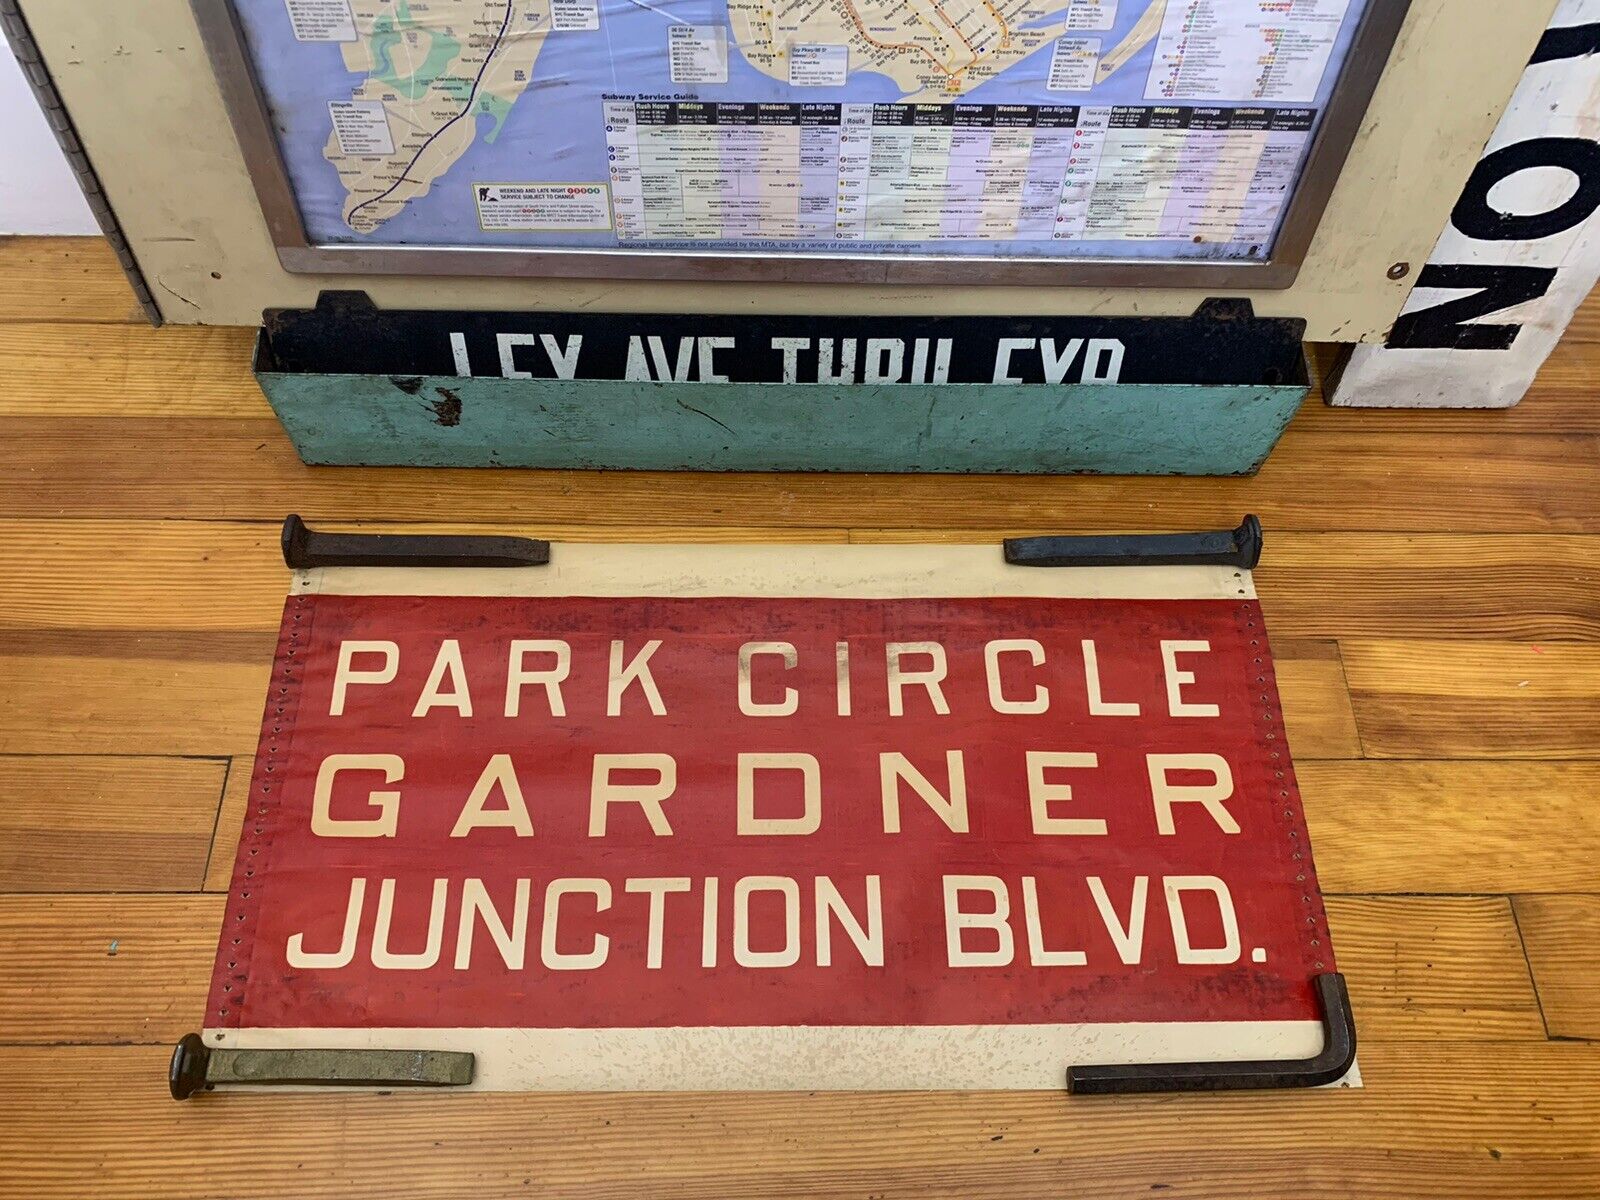 NY NYC BUS TROLLEY ROLL SIGN BROOKLYN PROSPECT PARK CIRCLE GARDNER JUNCTION BLVD